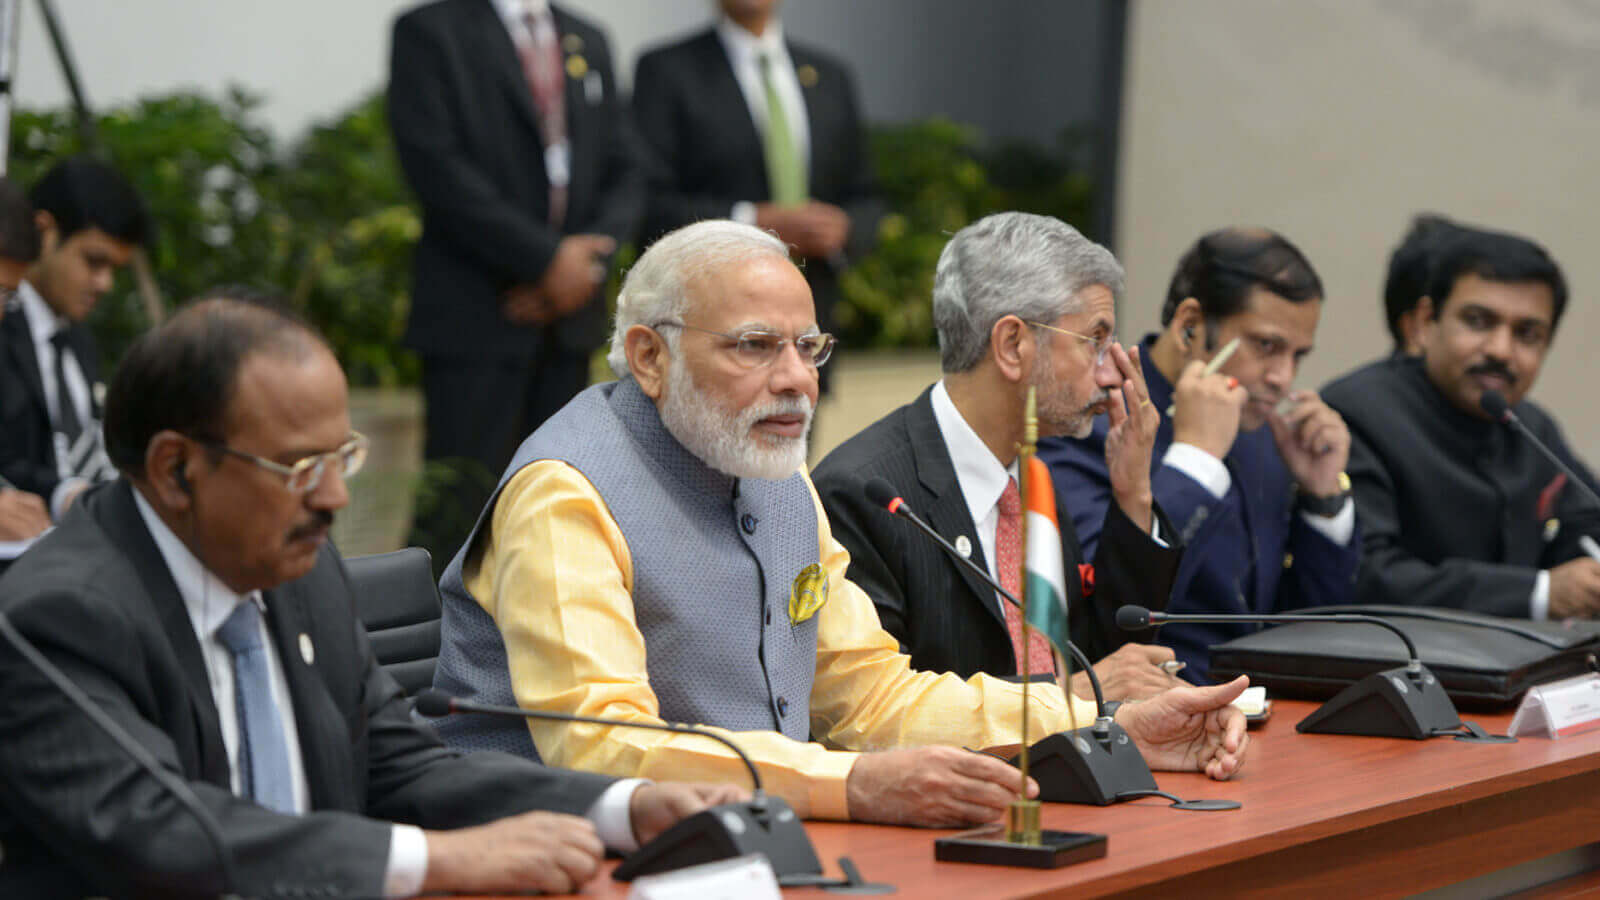 Why “Becoming a Vishwaguru” Matters to Modi and India’s Foreign Policy